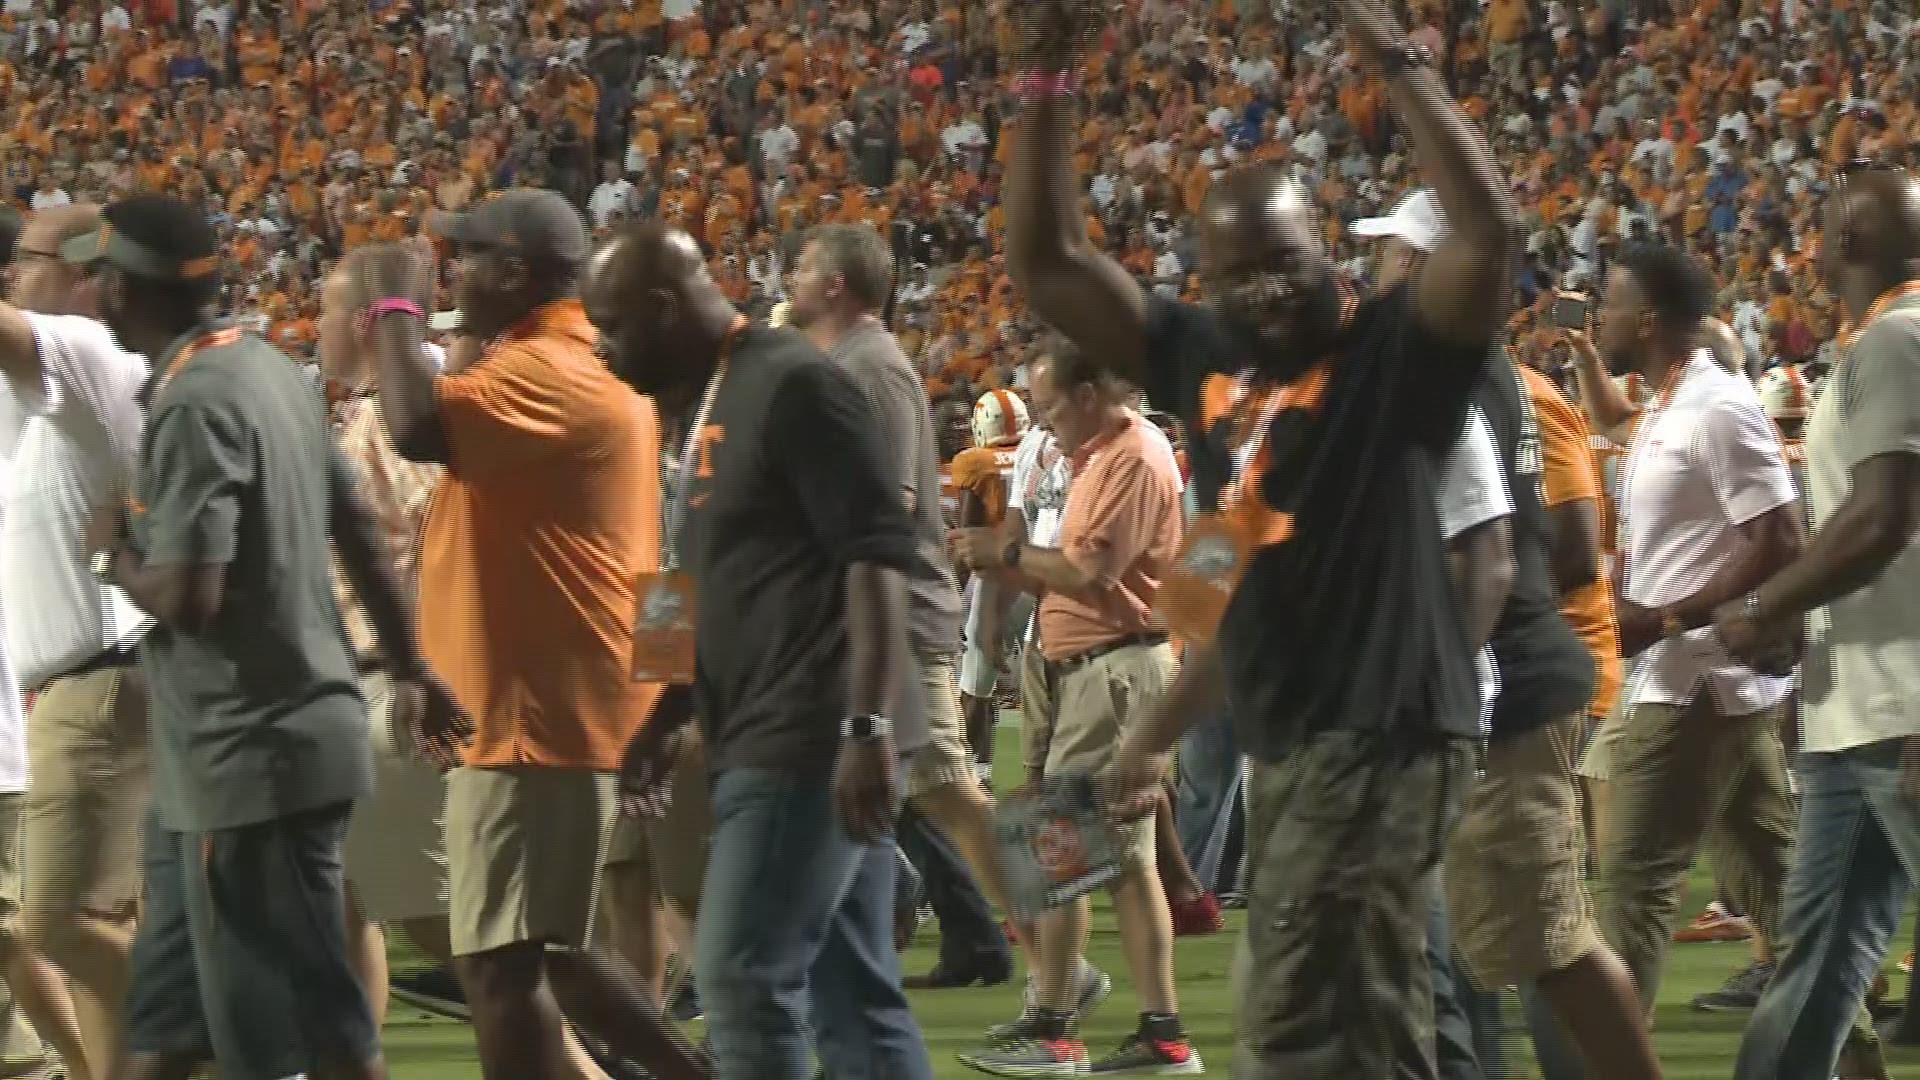 The 1998 National Championship Tennessee team honored after the 1st quarter of the Florida game.